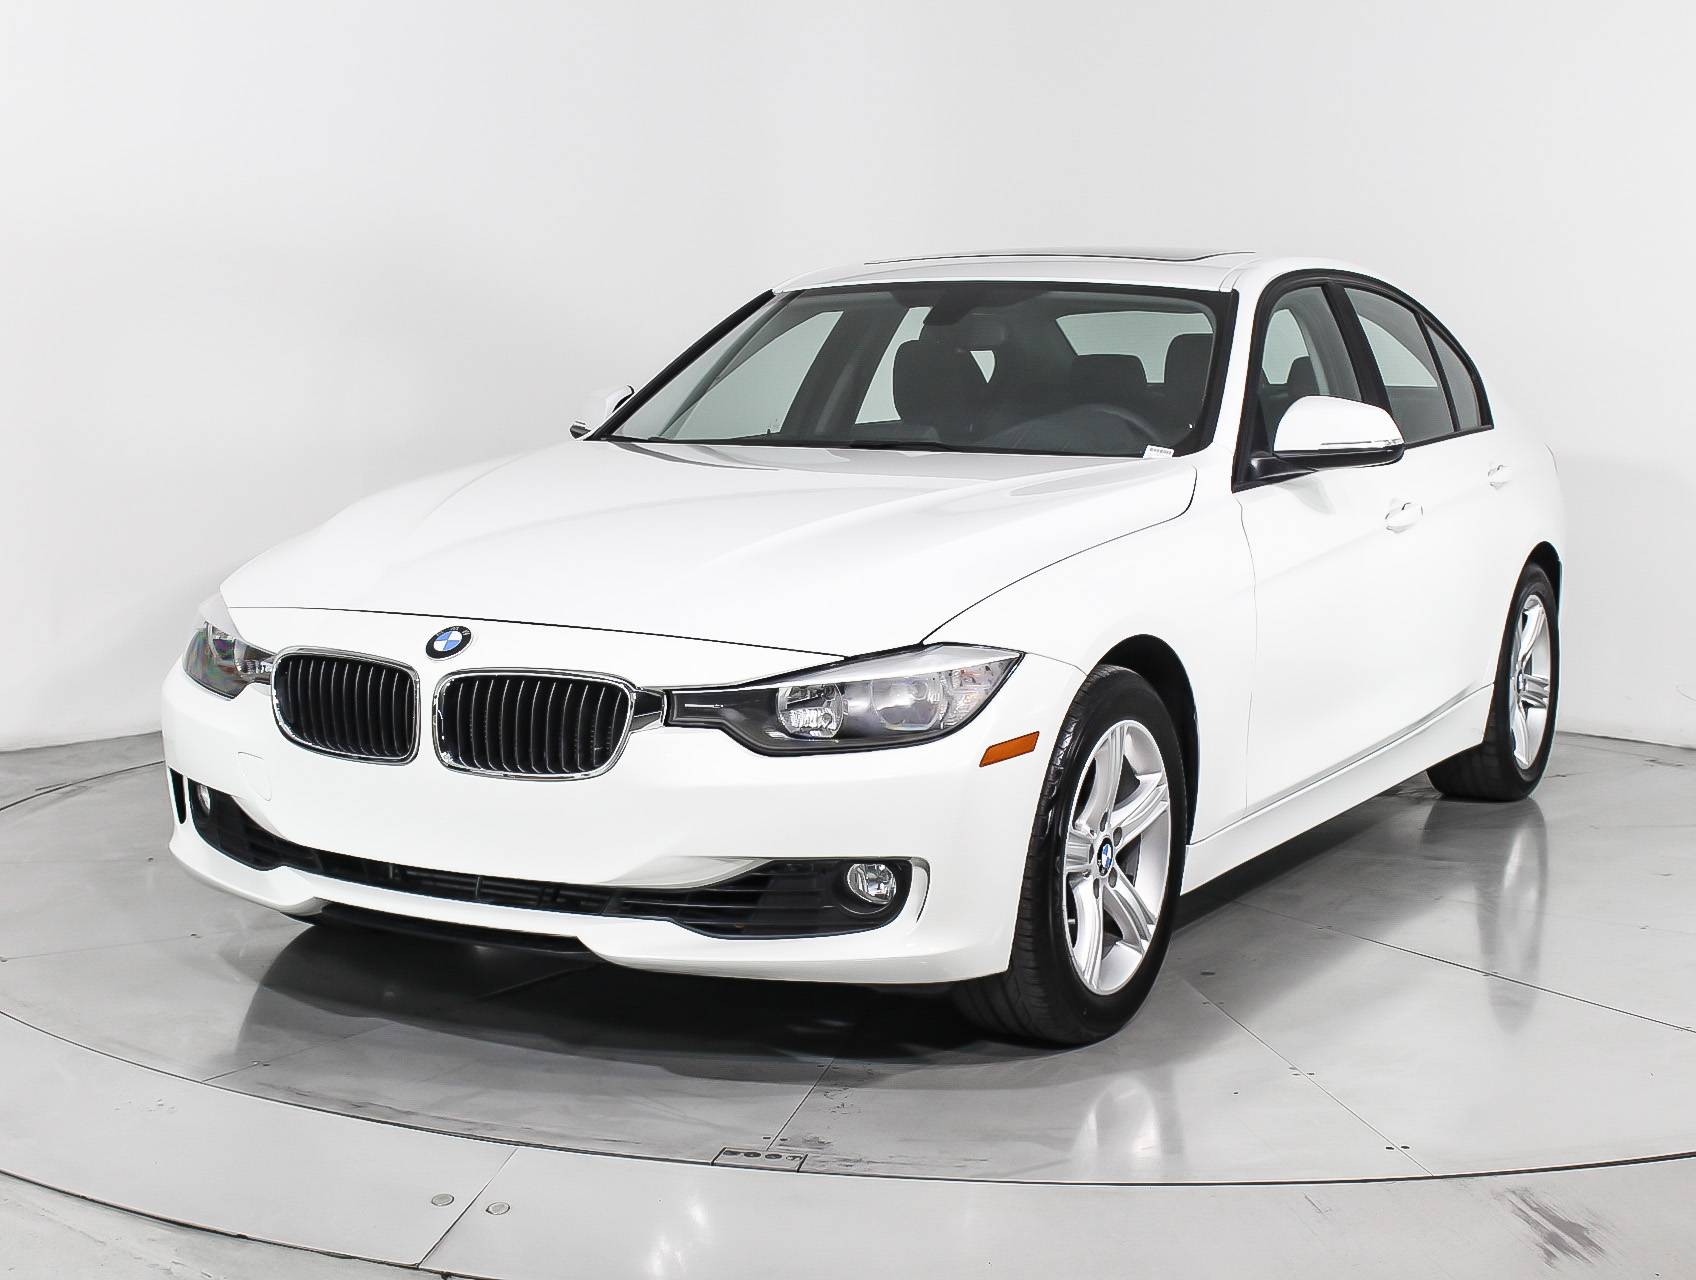 Used 2015 BMW 3 SERIES 328I XDRIVE for sale in HOLLYWOOD | 99891